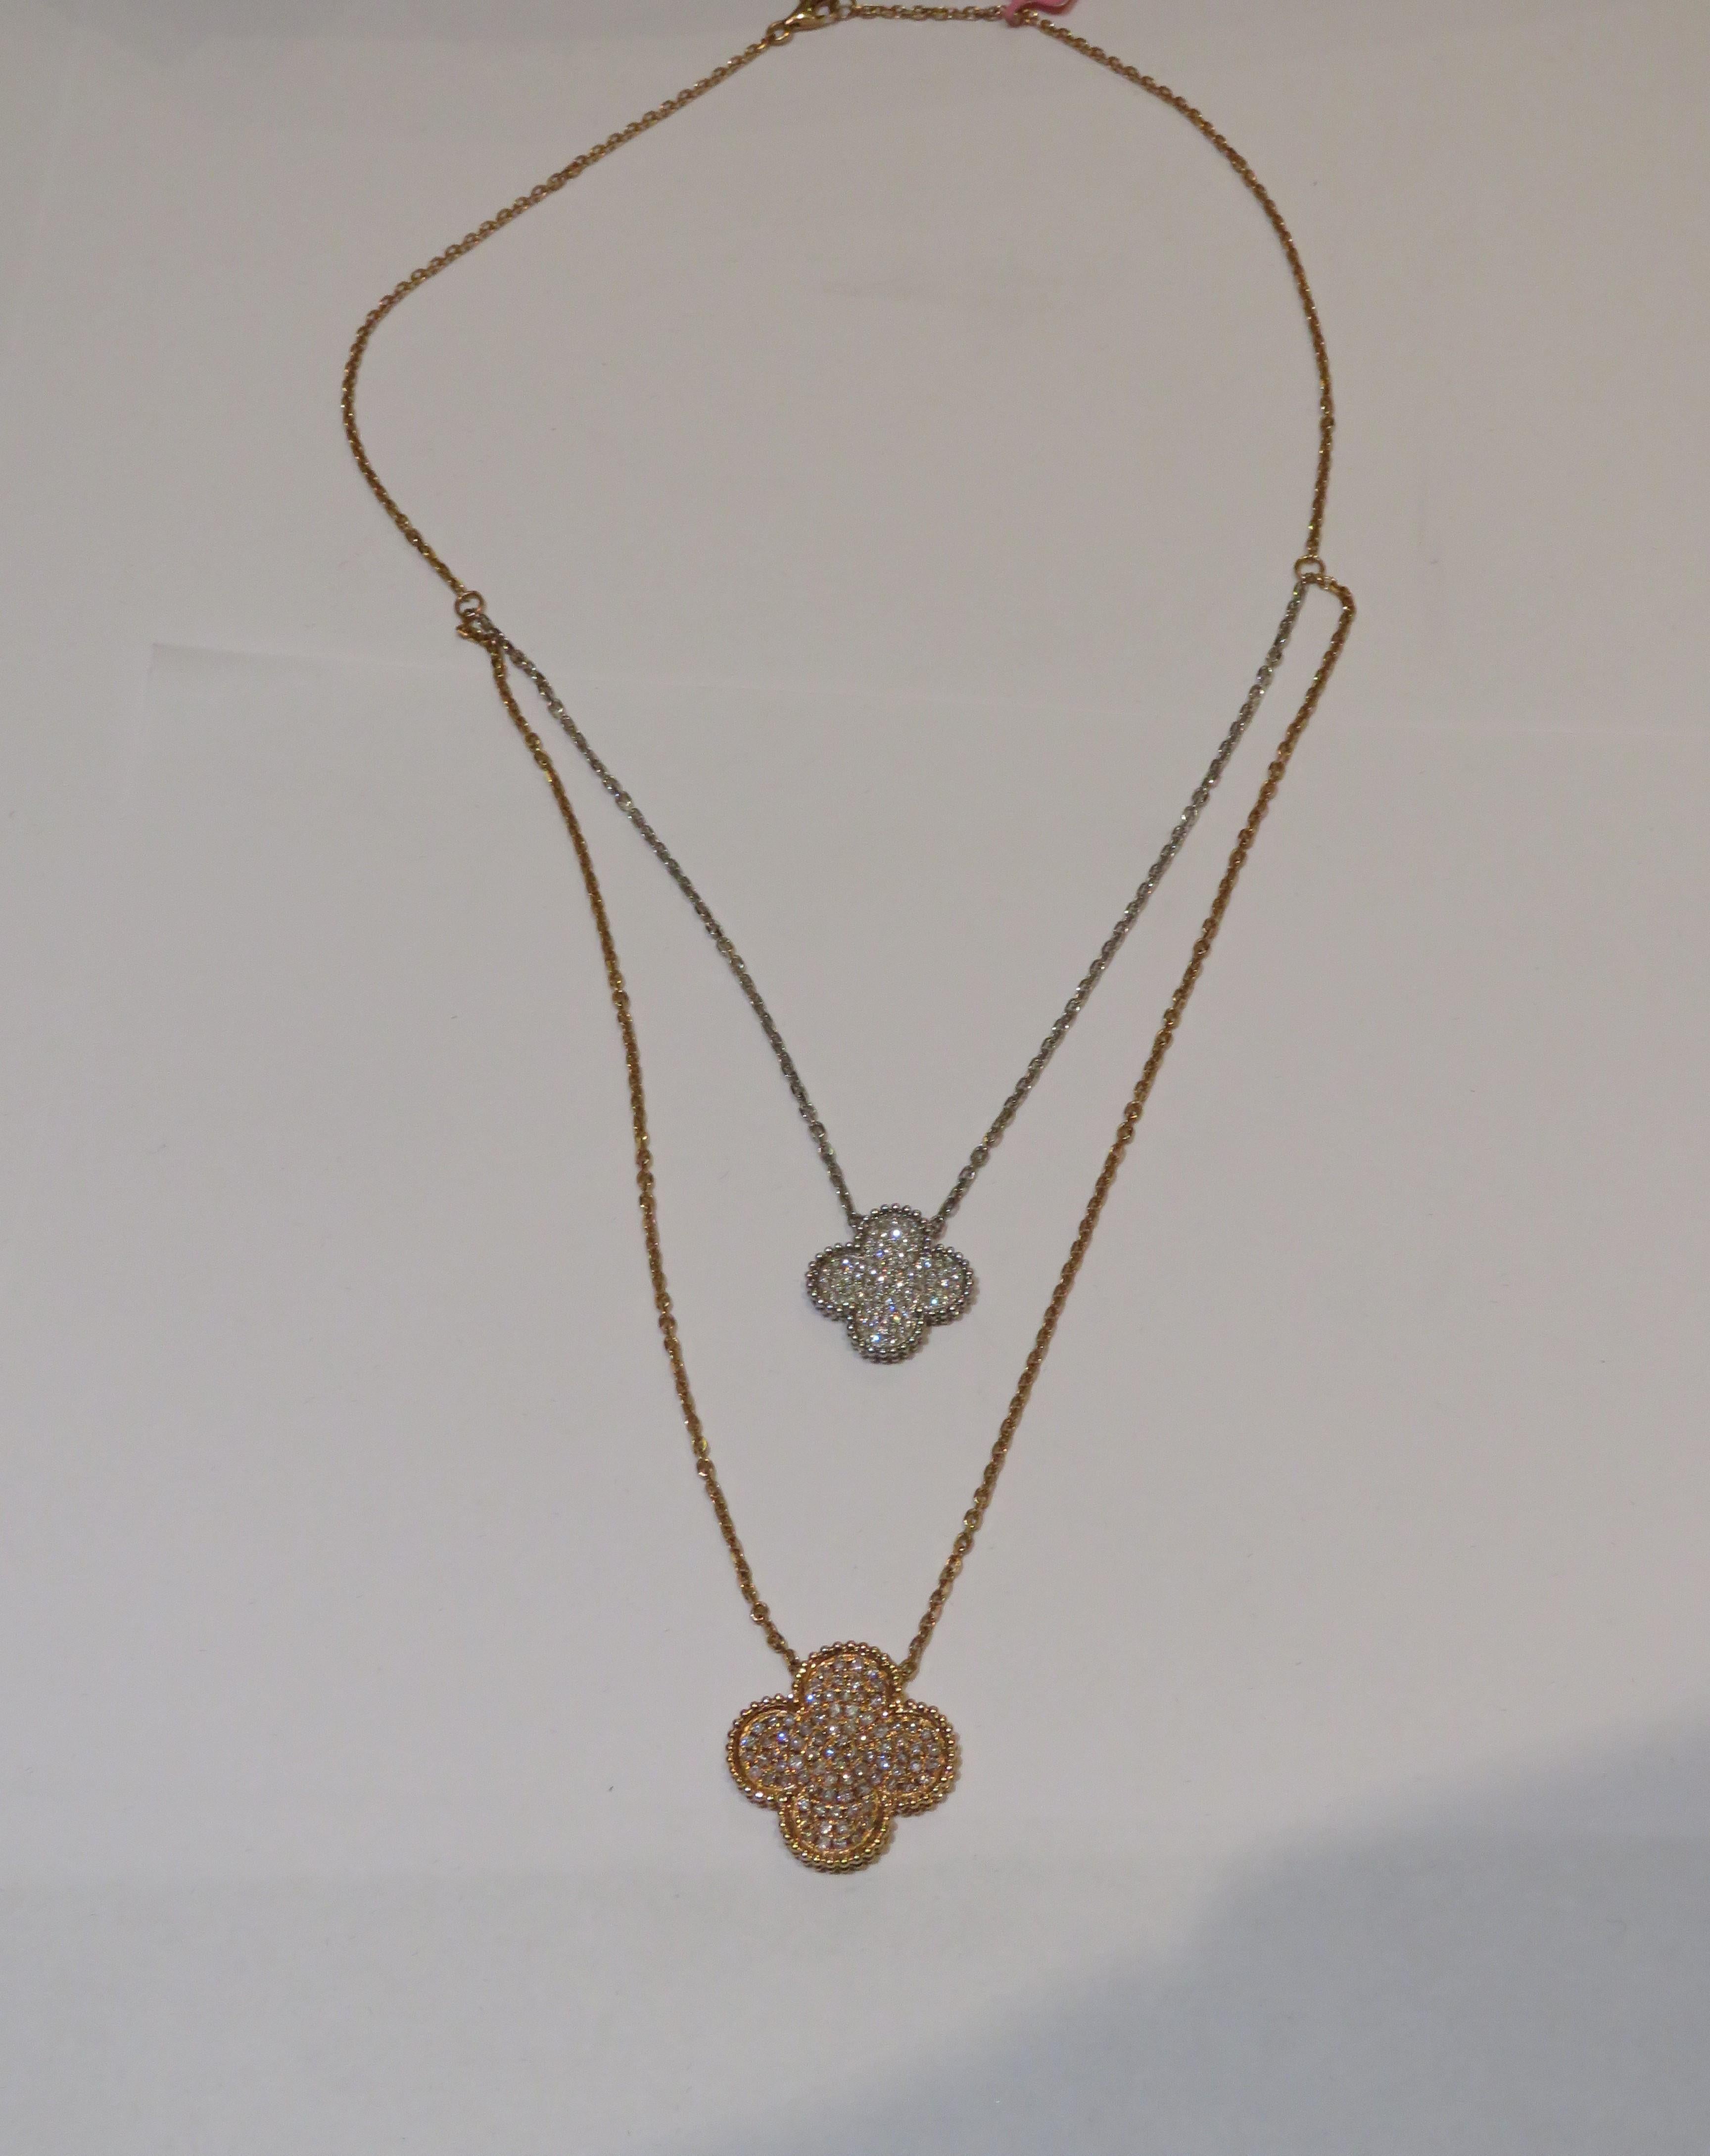 The Following Item we are offering is A Rare 18KT Gold Fancy Large Double Clover Pink Diamond Necklace. Necklace is comprised of Finely Set Glittering Gorgeous Fancy Pink Diamonds 1 Clover and adorned with a smaller White Diamond clover!!! The